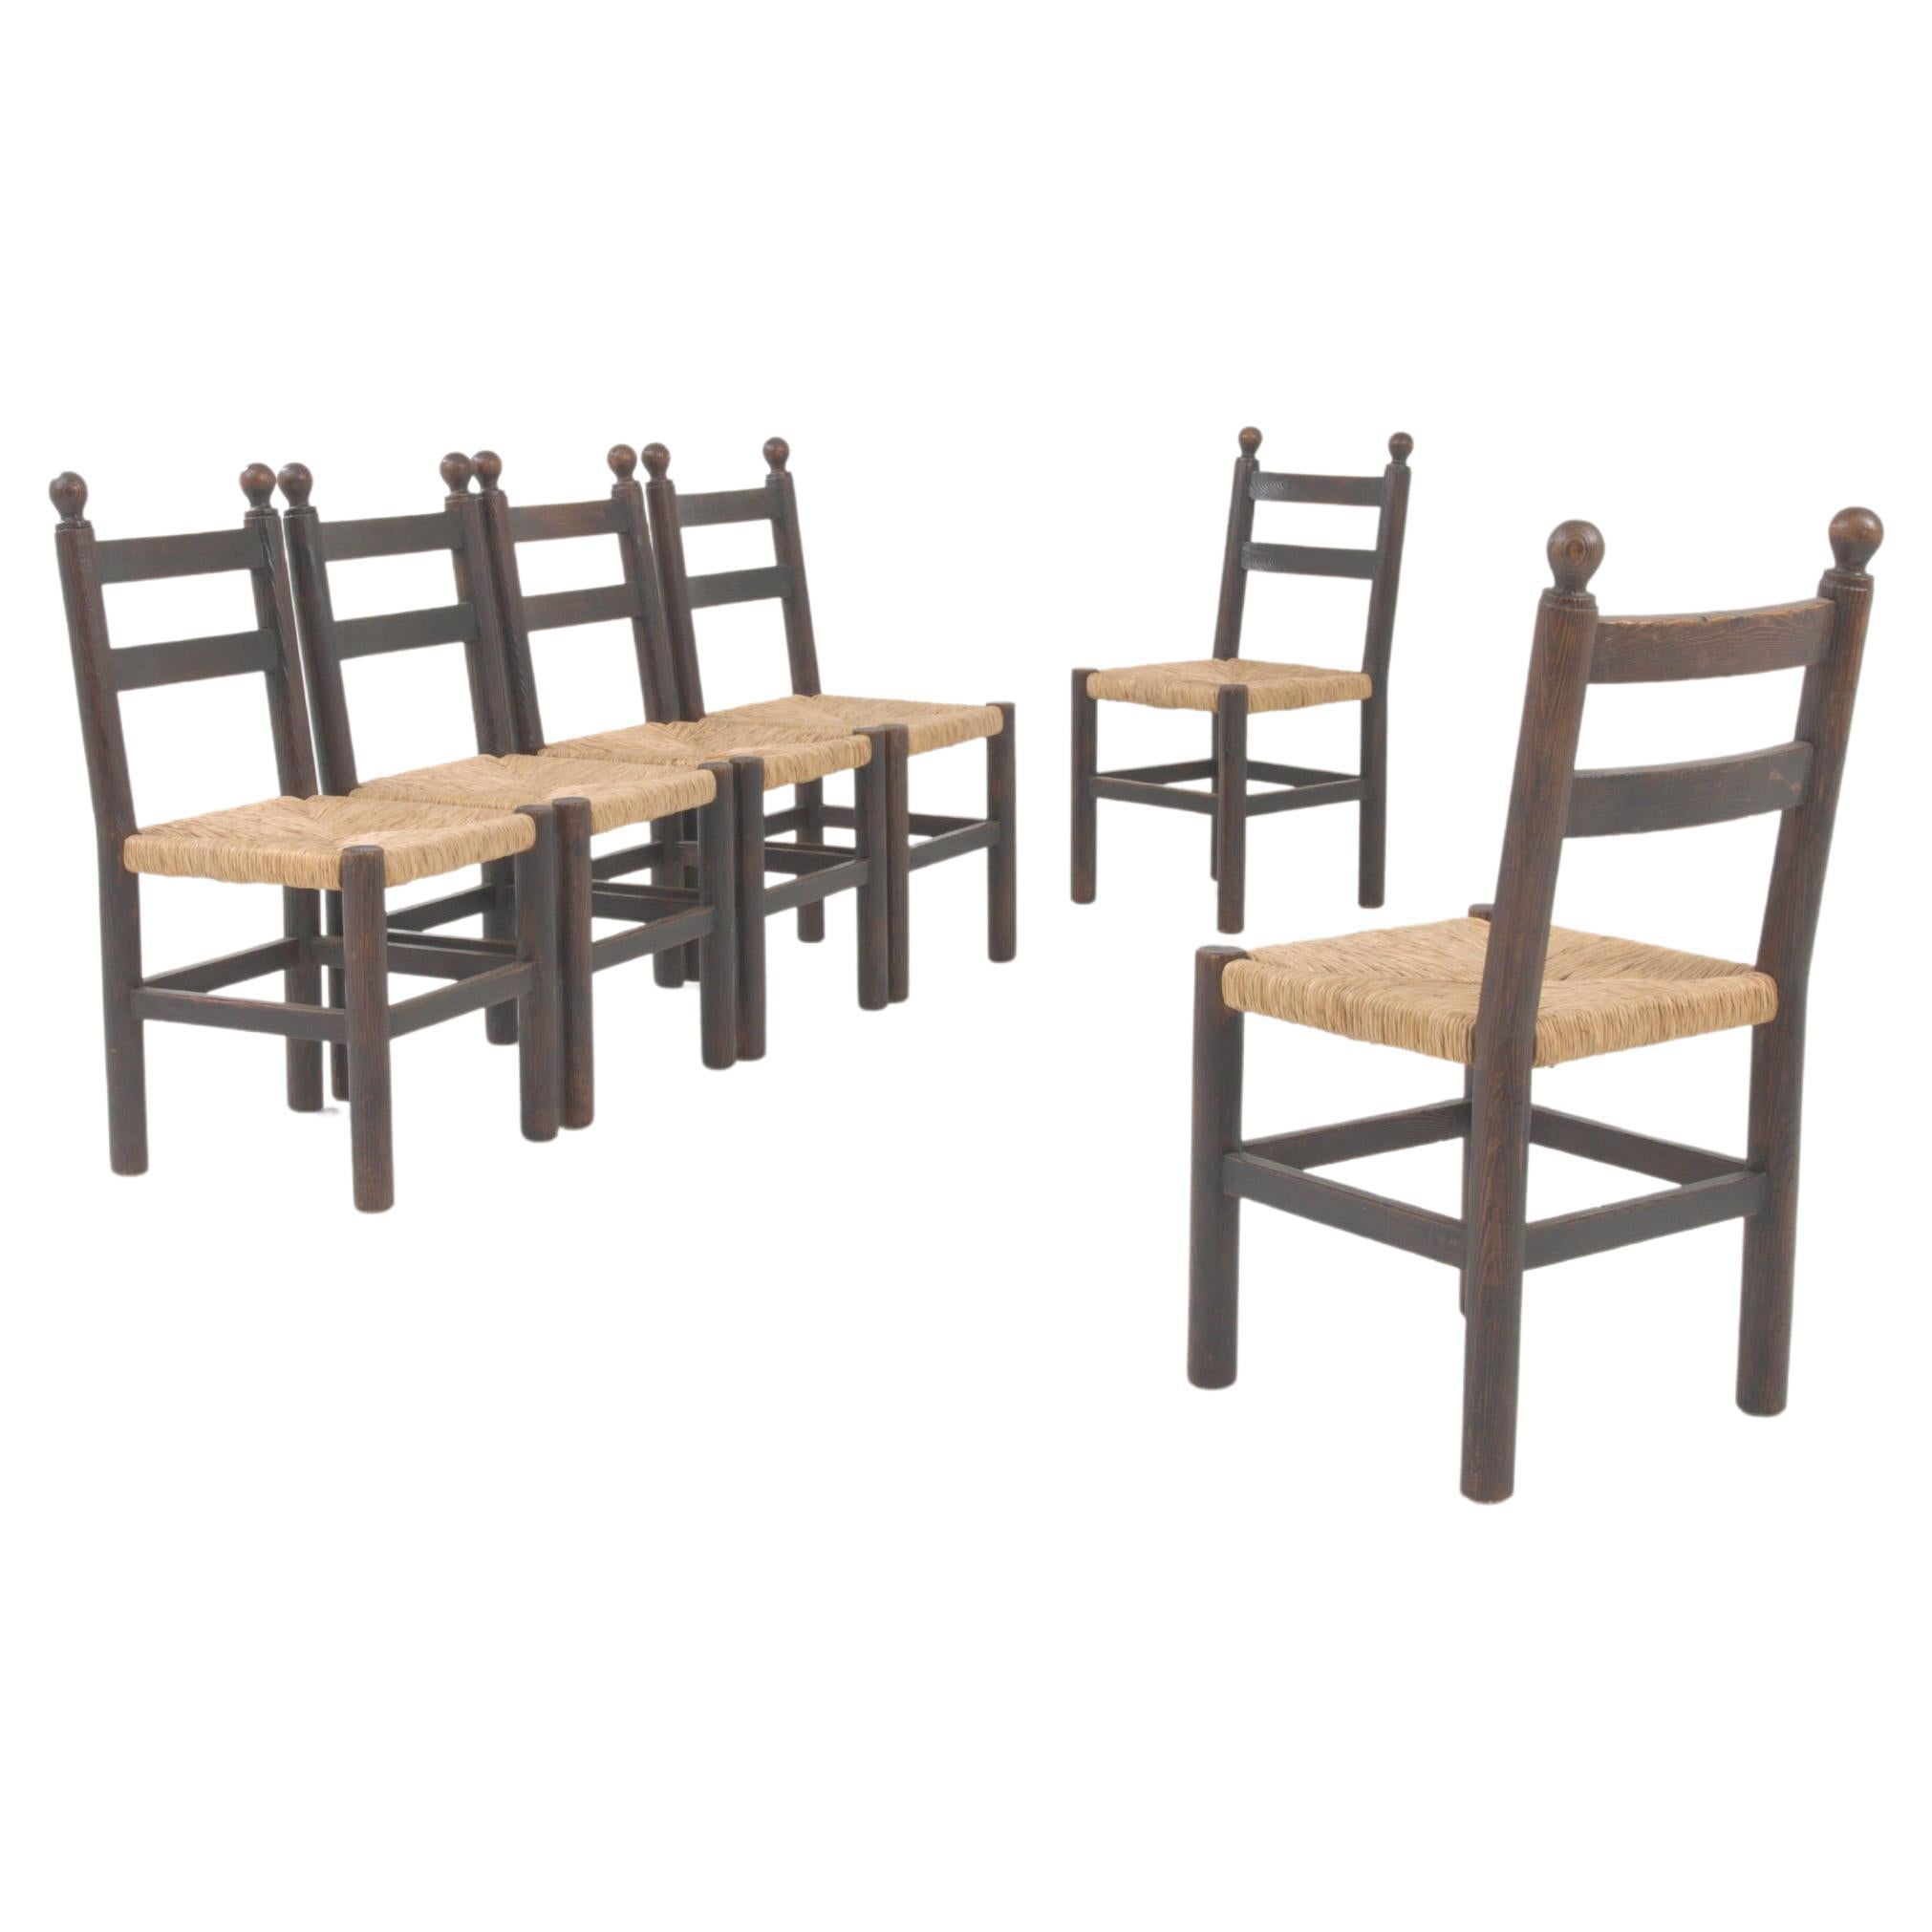 20th Century French Wooden Dining Chairs With Wicker Seats, Set of 6 For Sale